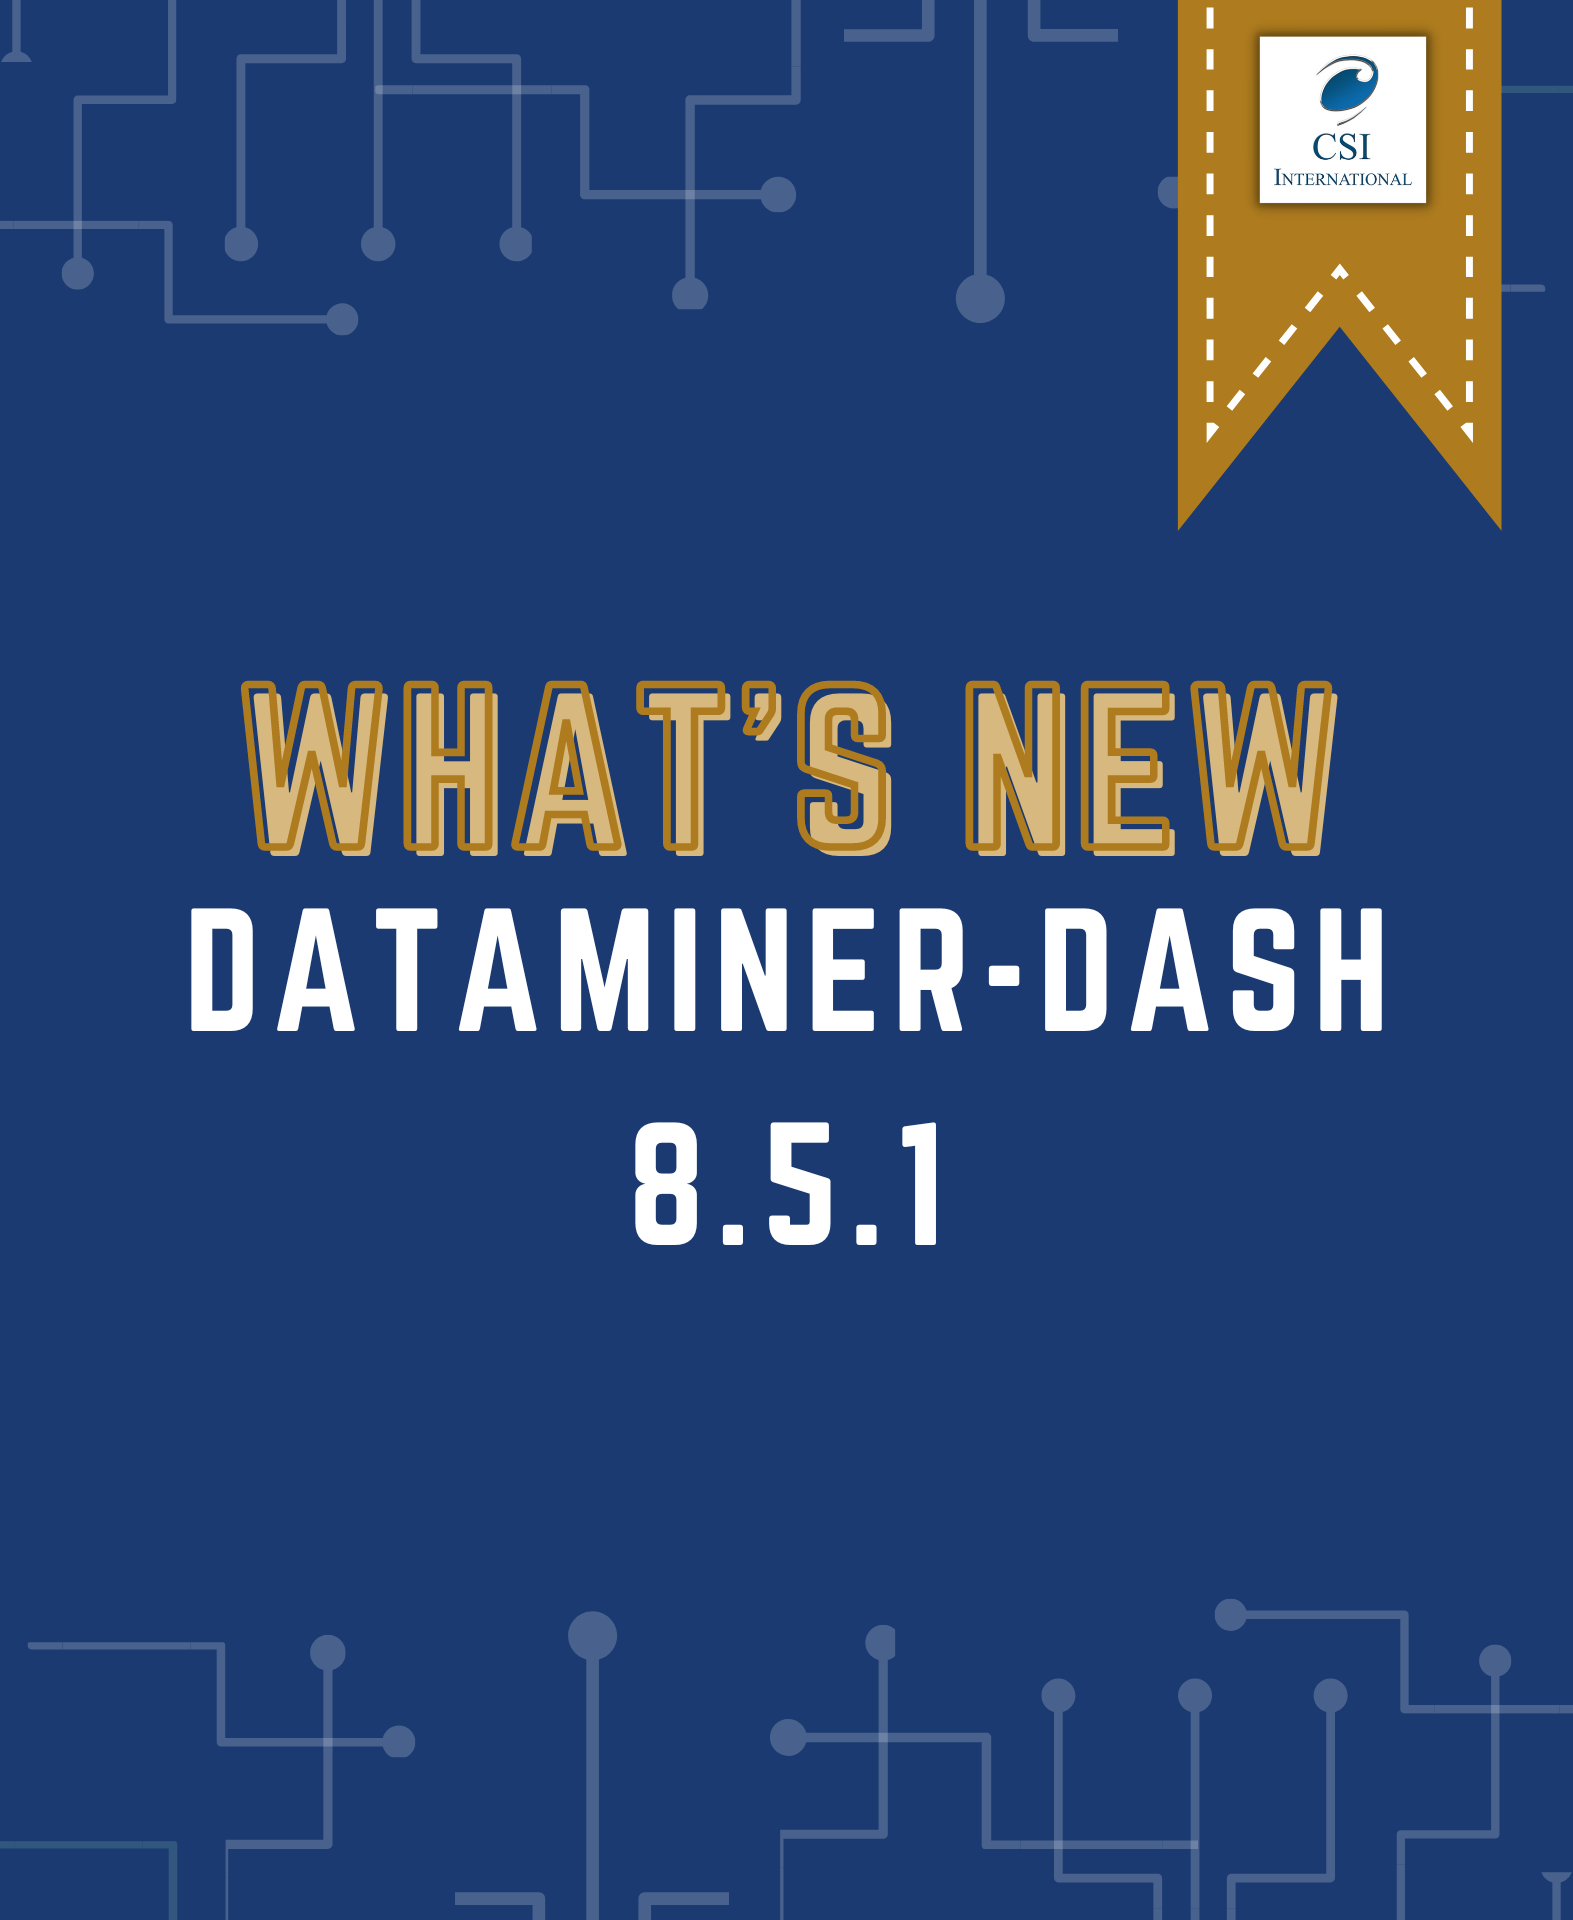 What's new in DataMiner-Dash 8.5.1 icon image